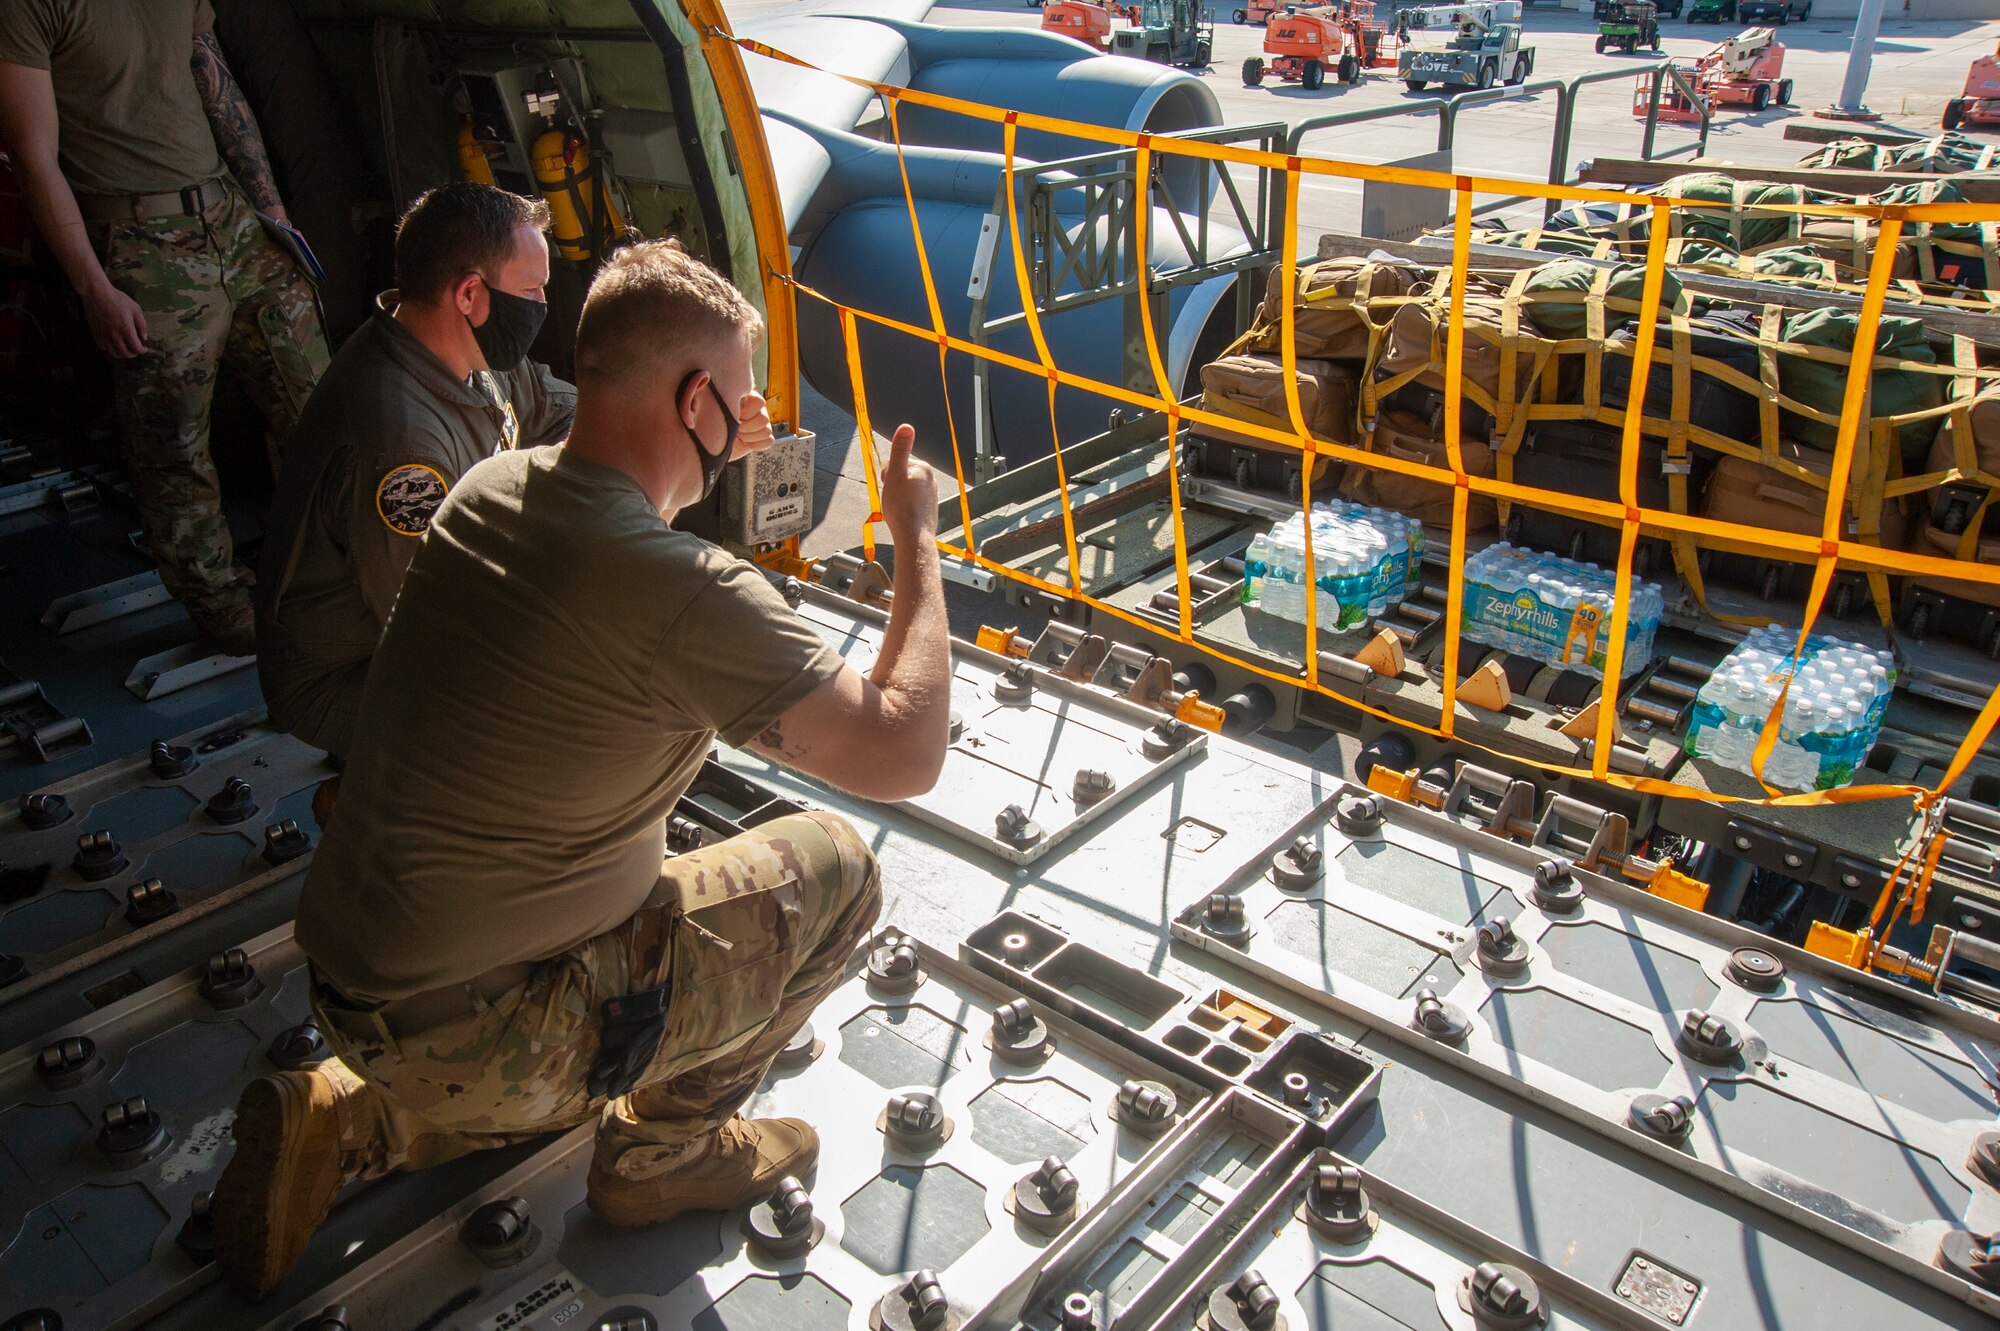 U.S. Air Force Airman 1st Class Tristan Shannon, a 91st Air Refueling Squadron (ARS) boom operator, signals to the K-Loader driver when pulling up to a KC-135 Stratotanker on the flightline, April 9, 2021, at MacDill Air Force Base, Fla. The K-Loader loaded bags belonging to Airmen from the 91st ARS that deployed to Al Udeid Air Base, Qatar. (U.S. Air Force photo by Airman 1st Class David D. McLoney)